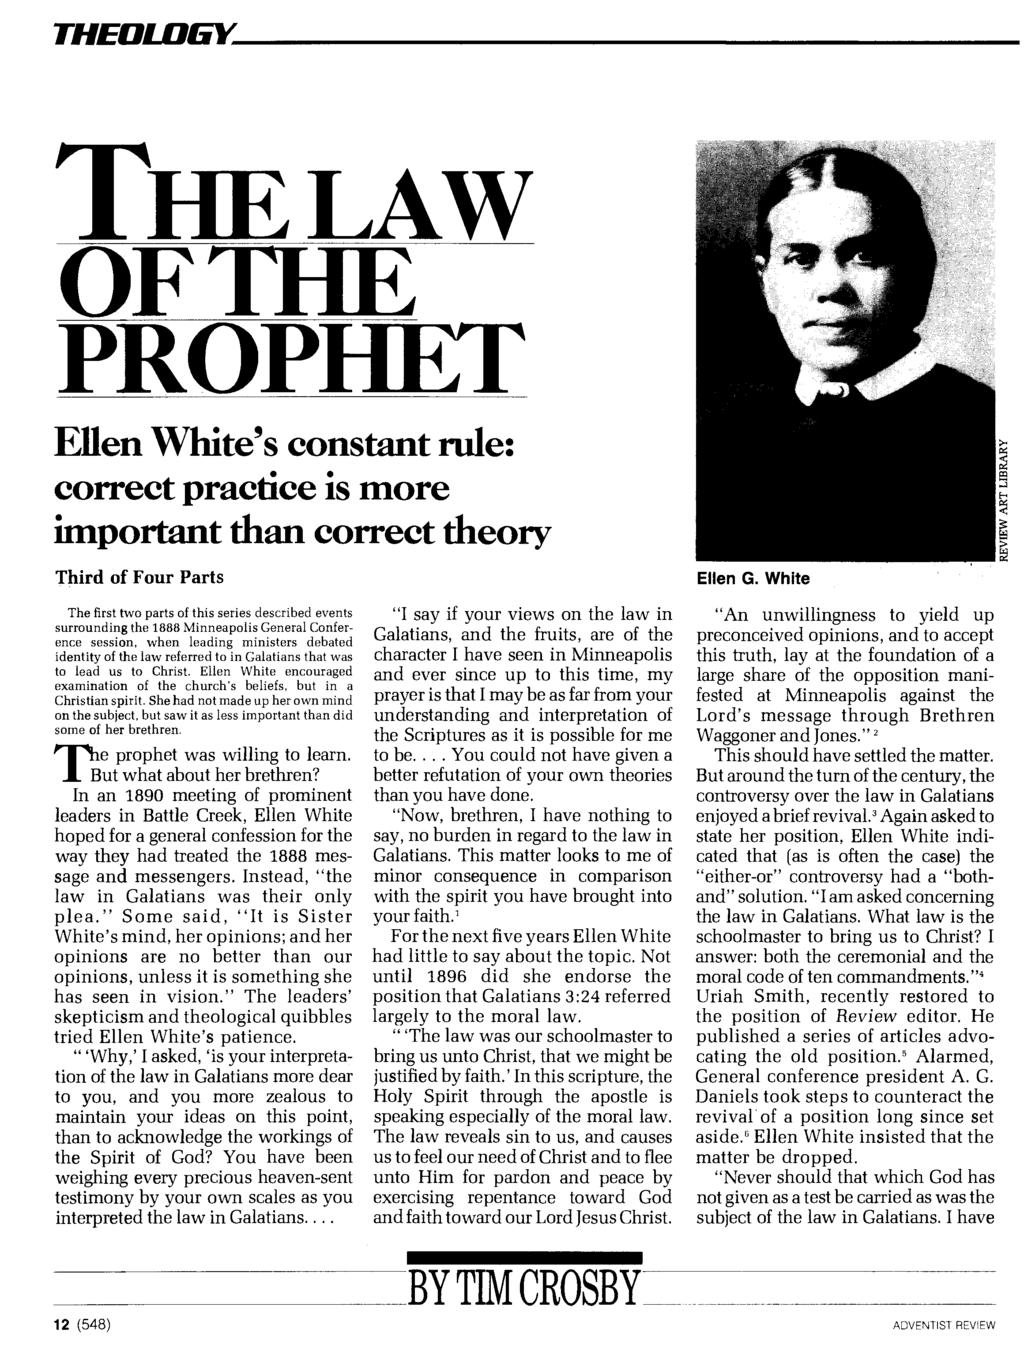 THEOLOGY THE LAW OF THE PROPHET Ellen White's constant rule: correct practice is more important than correct theory Third of Four Parts The first two parts of this series described events surrounding